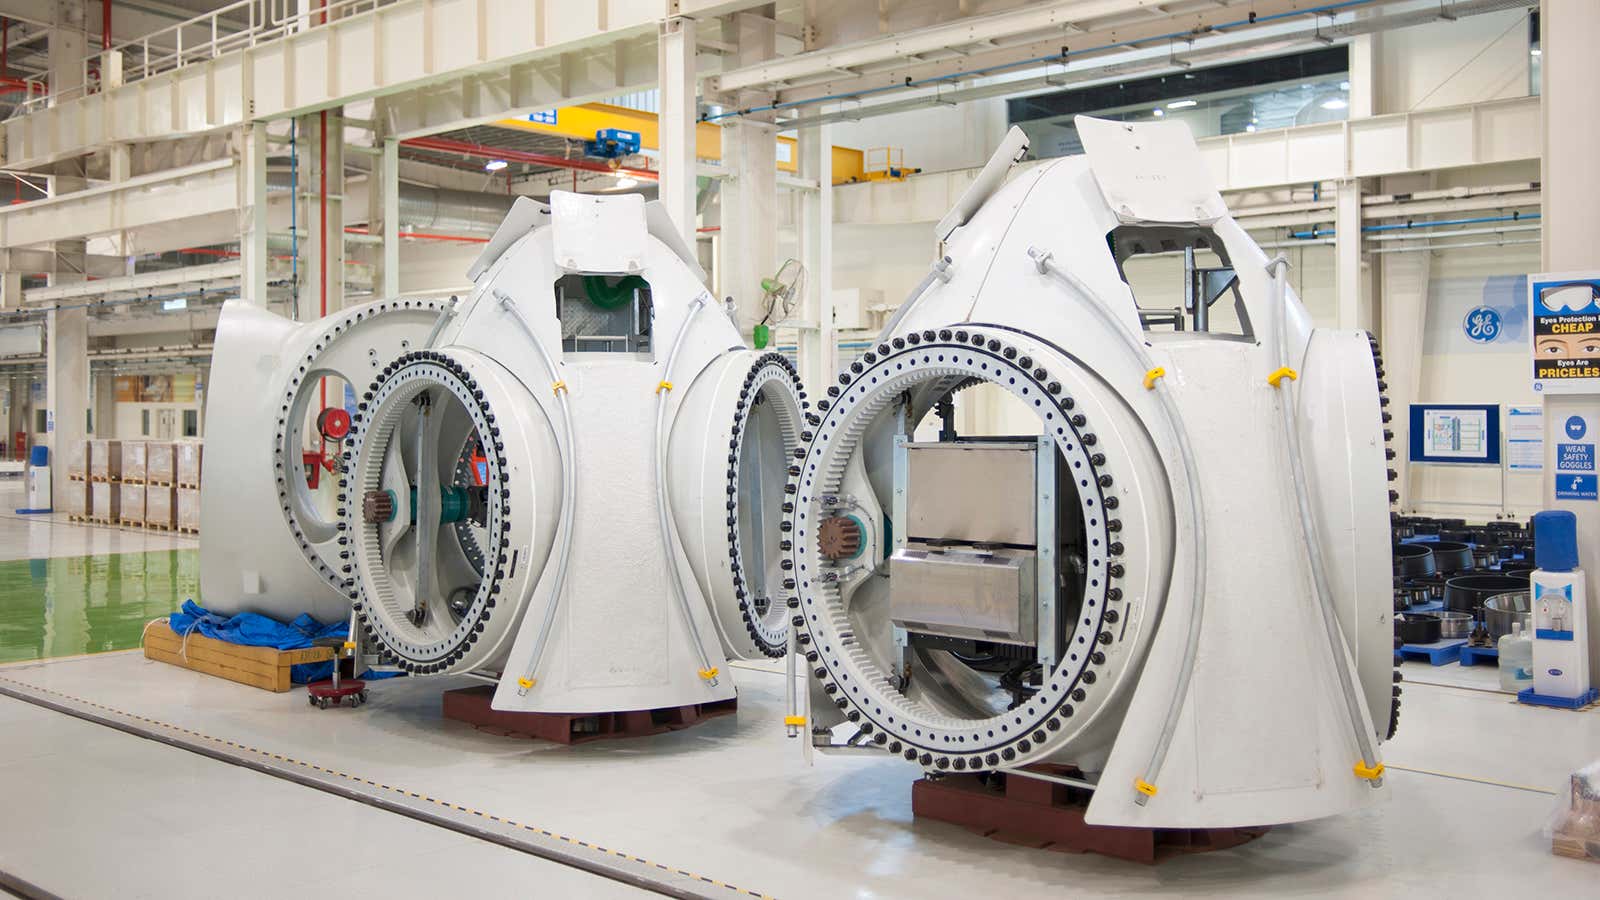 The wind turbine hub assembly at GE’s multi-modal manufacturing facility in Pune.